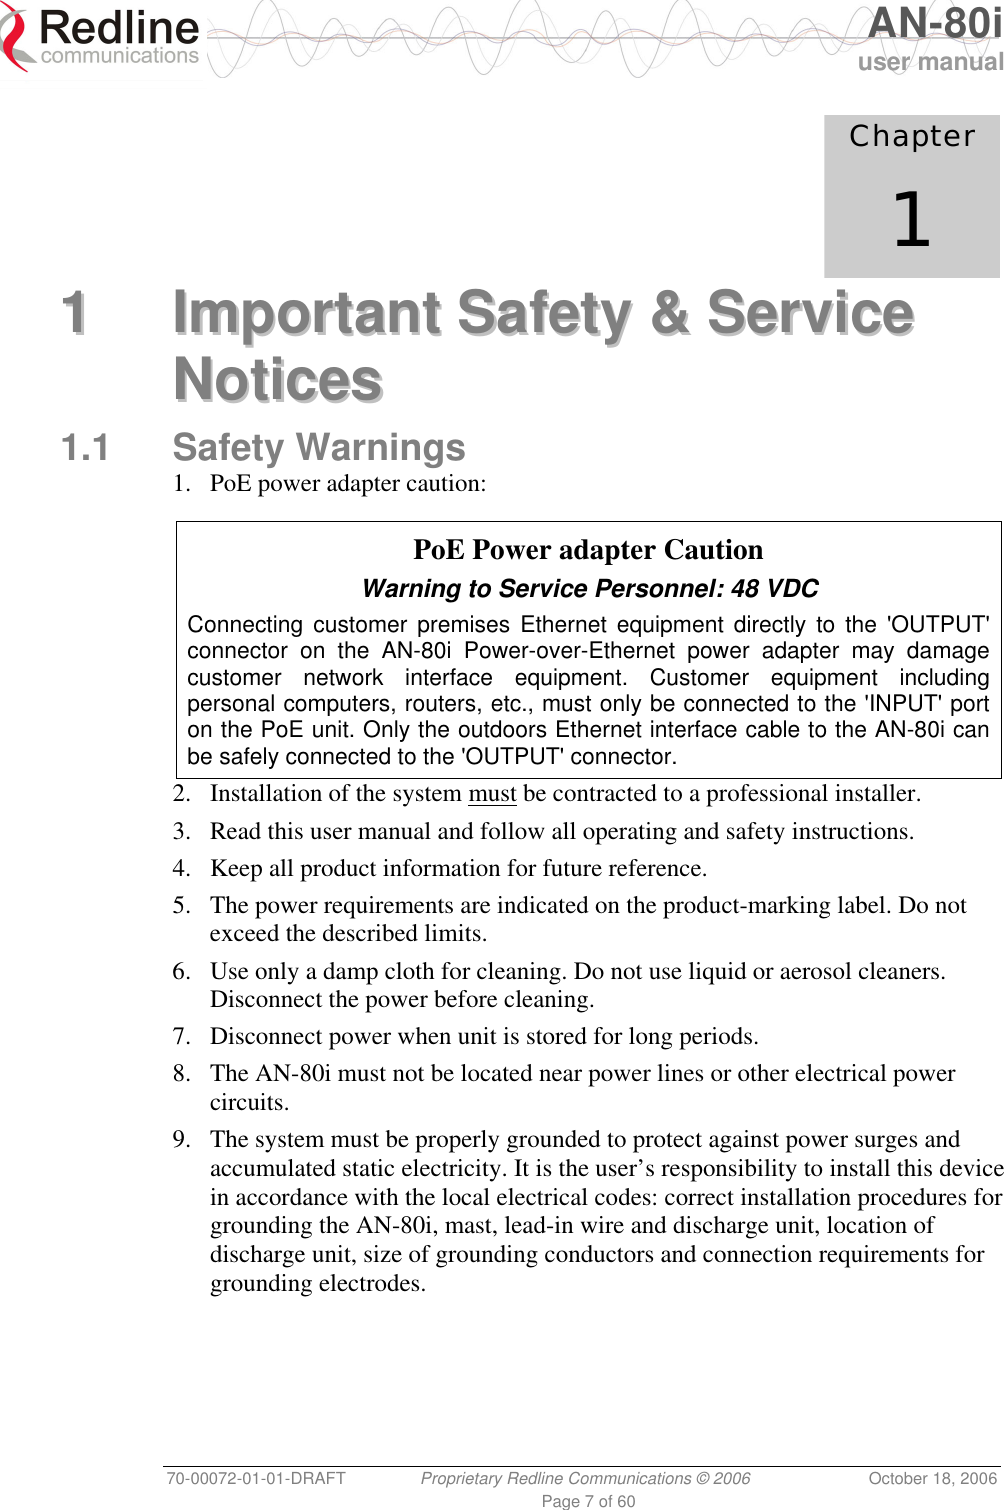   AN-80i user manual 70-00072-01-01-DRAFT  Proprietary Redline Communications © 2006  October 18, 2006 Page 7 of 60             Chapter 1 11  IImmppoorrttaanntt  SSaaffeettyy  &amp;&amp;  SSeerrvviiccee  NNoottiicceess  1.1 Safety Warnings 1.  PoE power adapter caution:    PoE Power adapter Caution Warning to Service Personnel: 48 VDC Connecting customer premises Ethernet equipment directly to the &apos;OUTPUT&apos; connector on the AN-80i Power-over-Ethernet power adapter may damage customer network interface equipment. Customer equipment including personal computers, routers, etc., must only be connected to the &apos;INPUT&apos; port on the PoE unit. Only the outdoors Ethernet interface cable to the AN-80i can be safely connected to the &apos;OUTPUT&apos; connector. 2. Installation of the system must be contracted to a professional installer. 3.  Read this user manual and follow all operating and safety instructions. 4.  Keep all product information for future reference. 5.  The power requirements are indicated on the product-marking label. Do not exceed the described limits. 6.  Use only a damp cloth for cleaning. Do not use liquid or aerosol cleaners. Disconnect the power before cleaning. 7.  Disconnect power when unit is stored for long periods. 8.  The AN-80i must not be located near power lines or other electrical power circuits. 9.  The system must be properly grounded to protect against power surges and accumulated static electricity. It is the user’s responsibility to install this device in accordance with the local electrical codes: correct installation procedures for grounding the AN-80i, mast, lead-in wire and discharge unit, location of discharge unit, size of grounding conductors and connection requirements for grounding electrodes. 